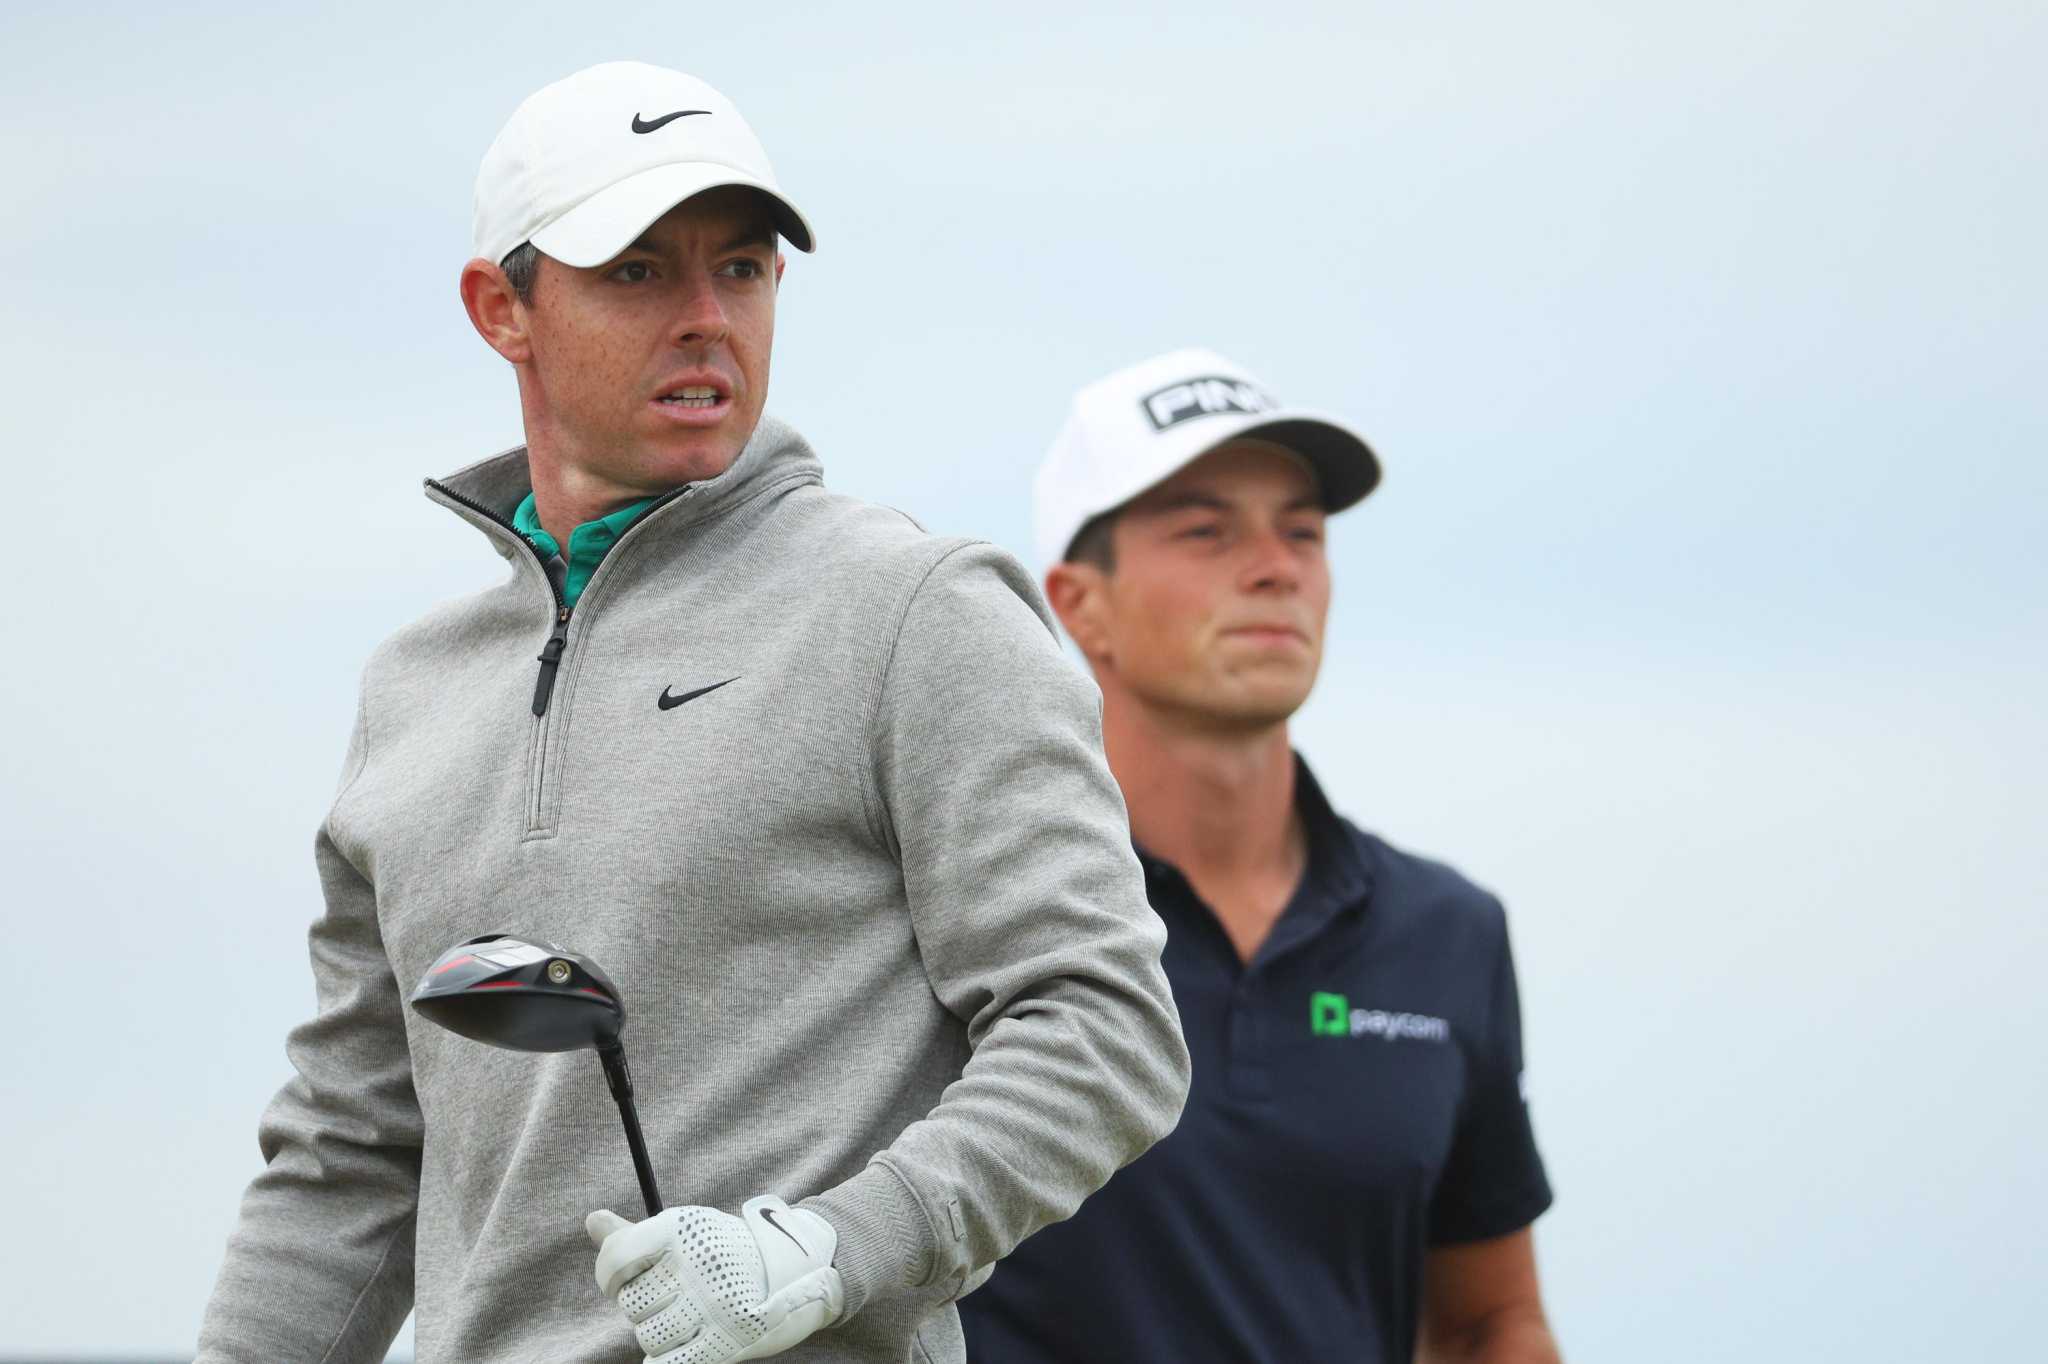 Rory McIlroy, Viktor Hovland share lead at British Open